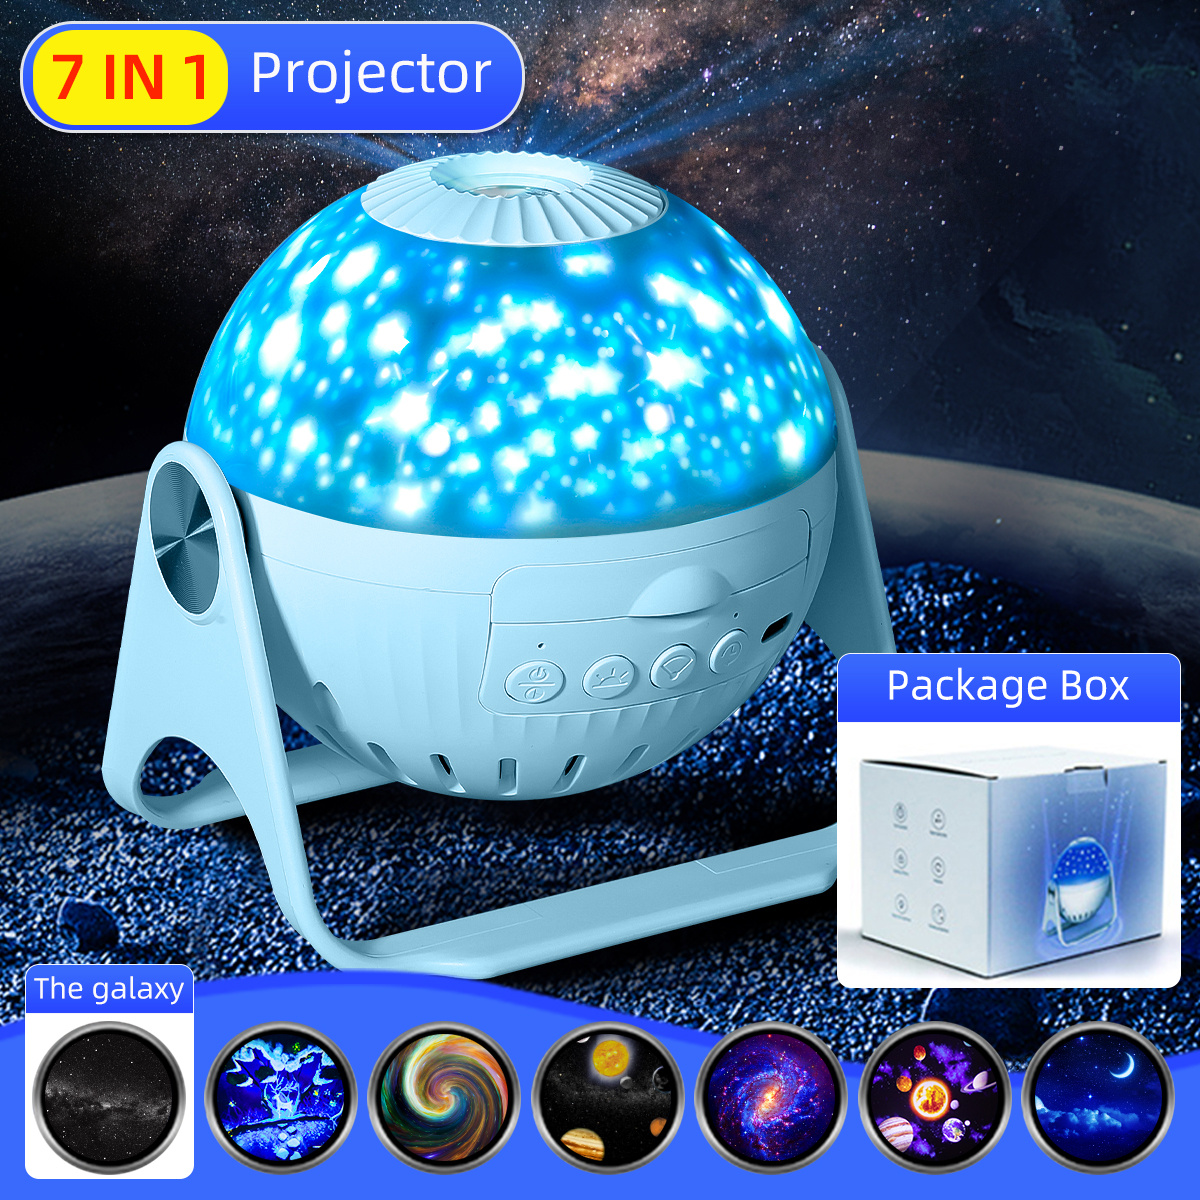 Planetarium Projector Star Projector Galaxy Projector-7 in 1 Constellation  Projector,360° Adjustable with Planets Nebulae Moon, Ceiling Projector for